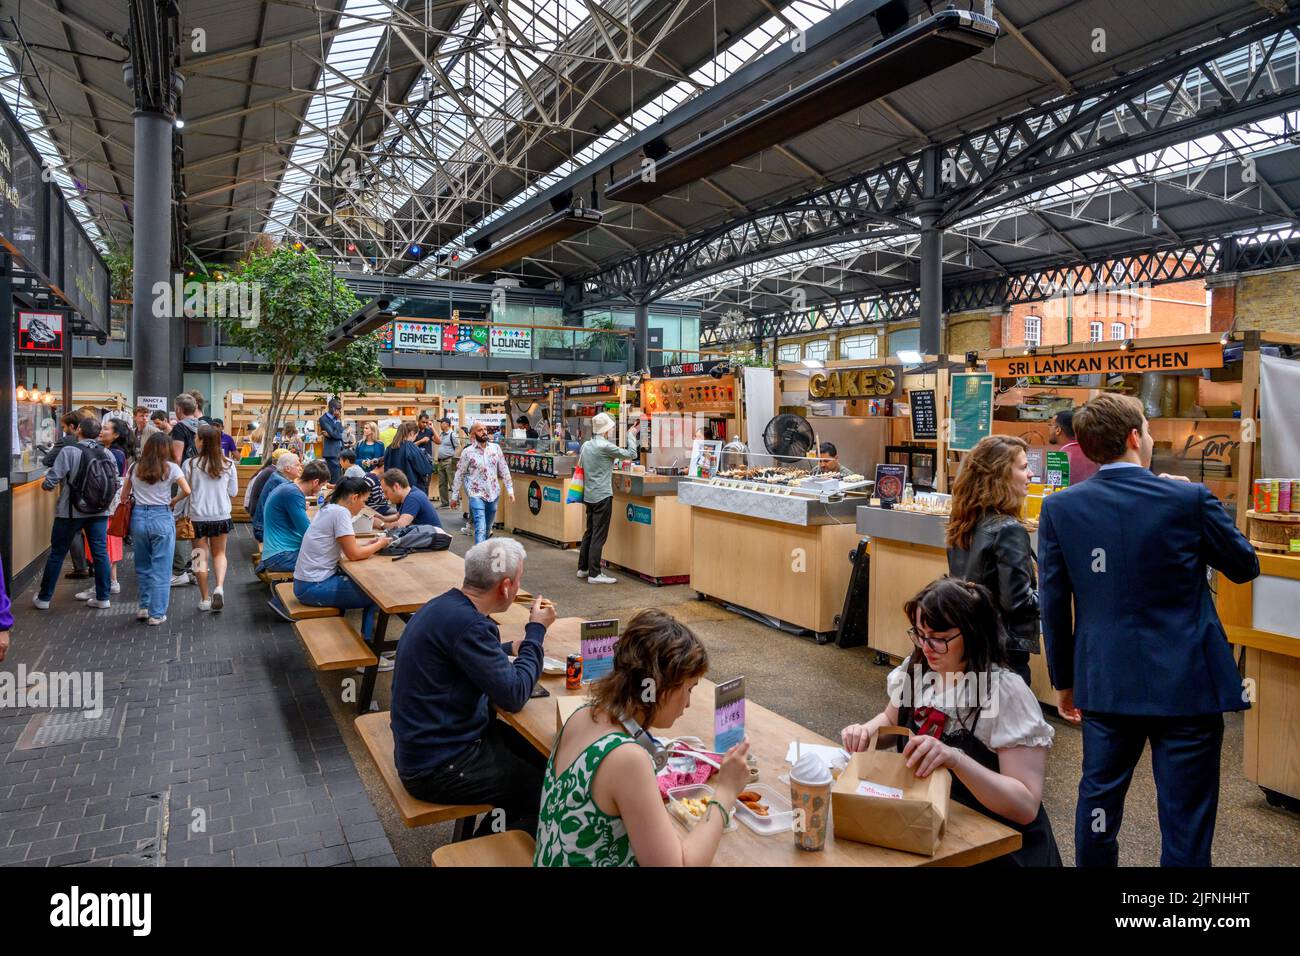 Food Stalls in Old Spitalfields Market, Tower Hamlets, East End, London, England, UK Stock Photo